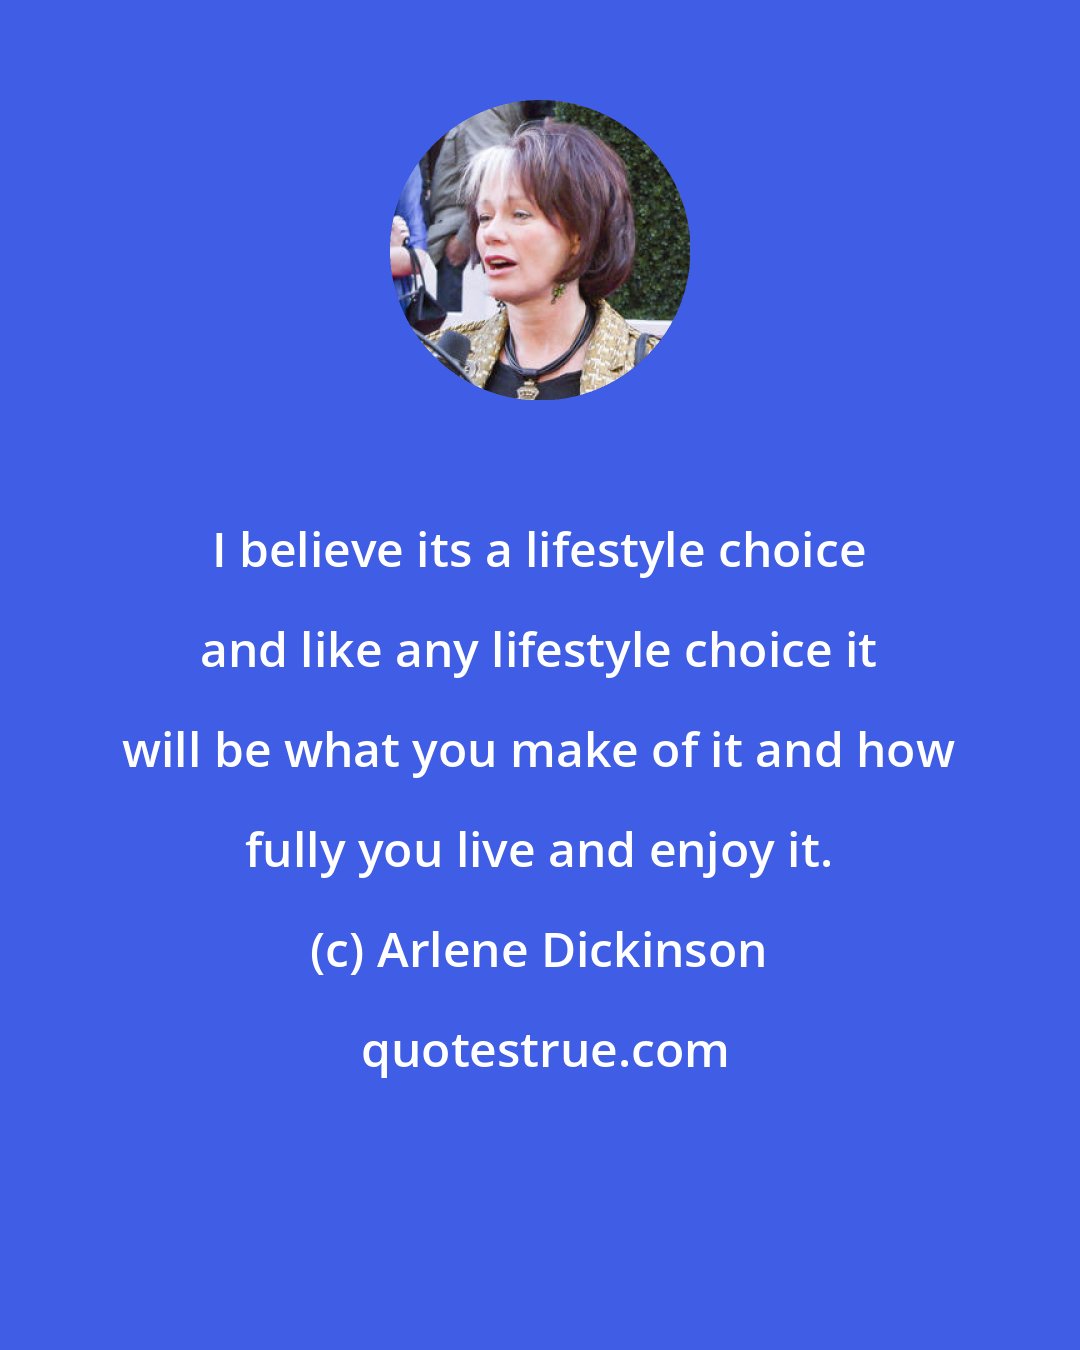 Arlene Dickinson: I believe its a lifestyle choice and like any lifestyle choice it will be what you make of it and how fully you live and enjoy it.